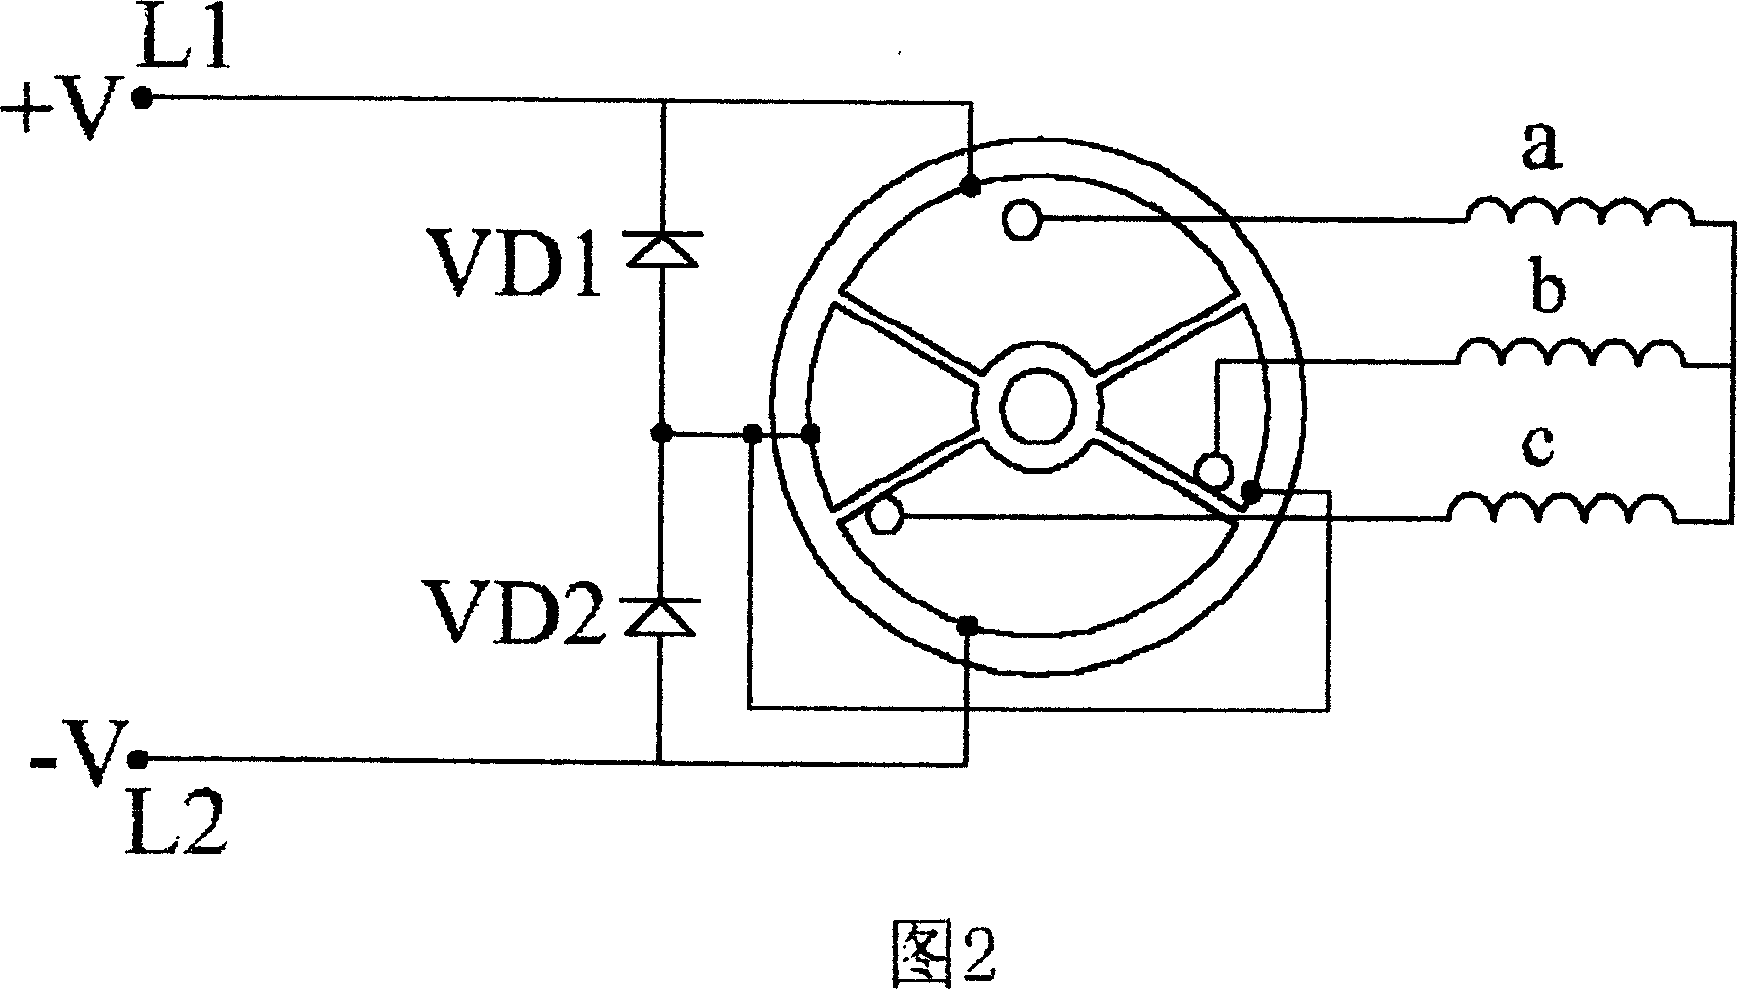 DC motor with commutator and its driven washing machine